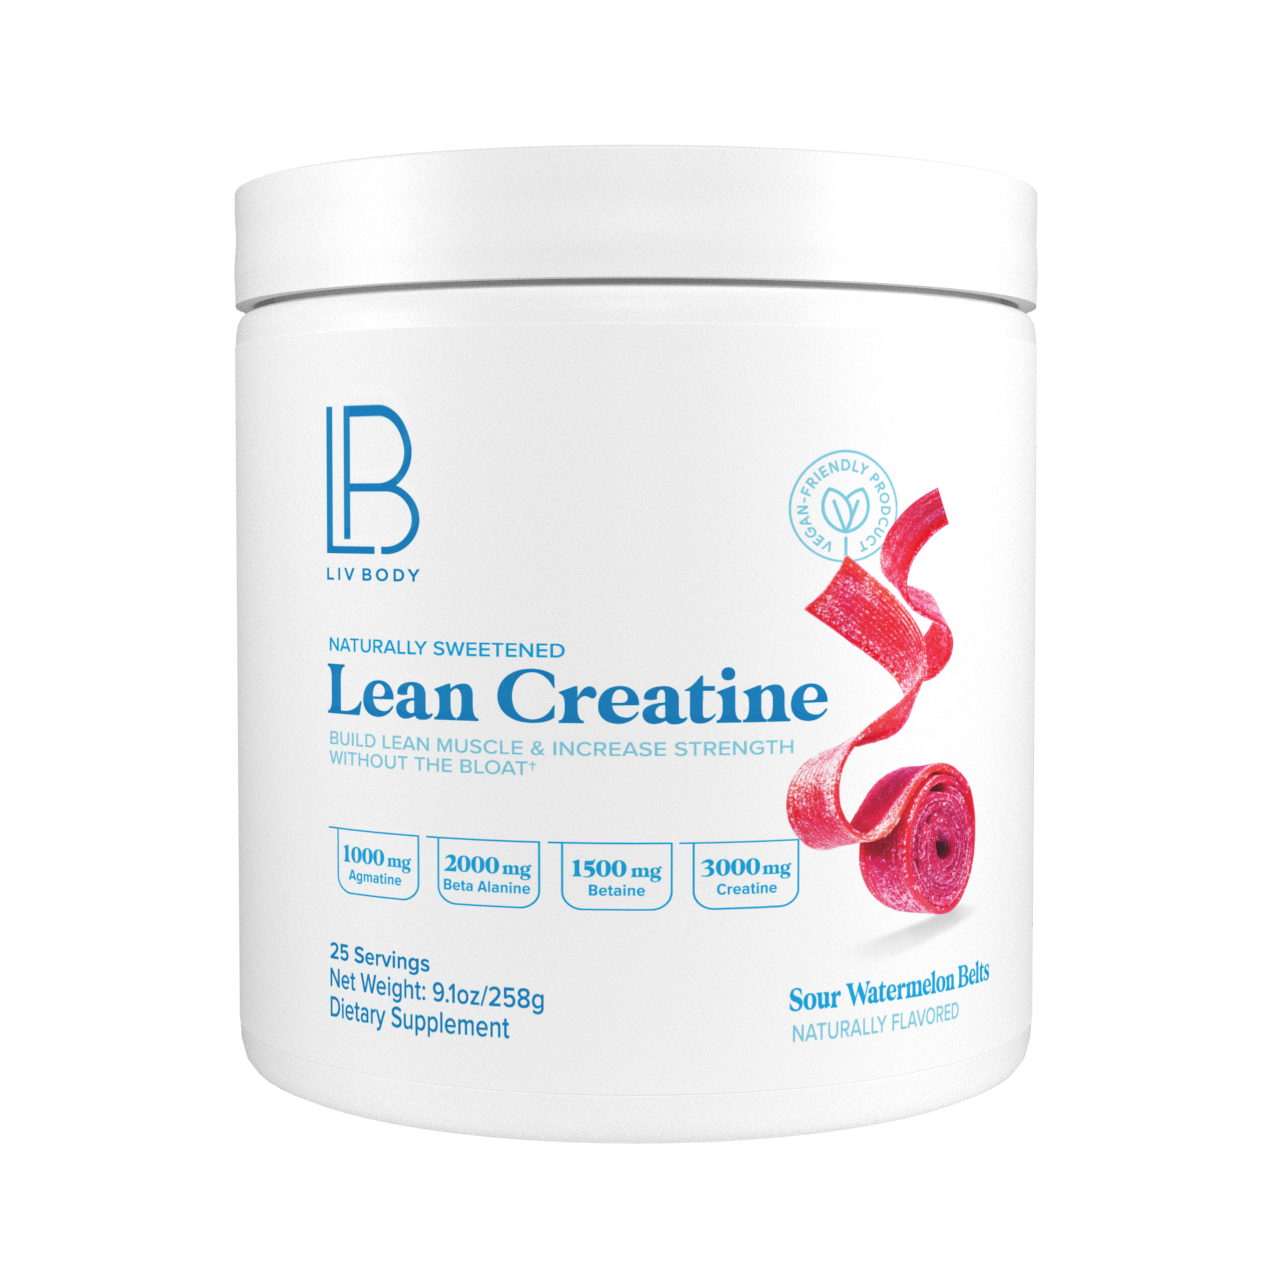 Picture of the Lean Creatine bottle from LIV, designed to promote muscle growth and lose body fat.